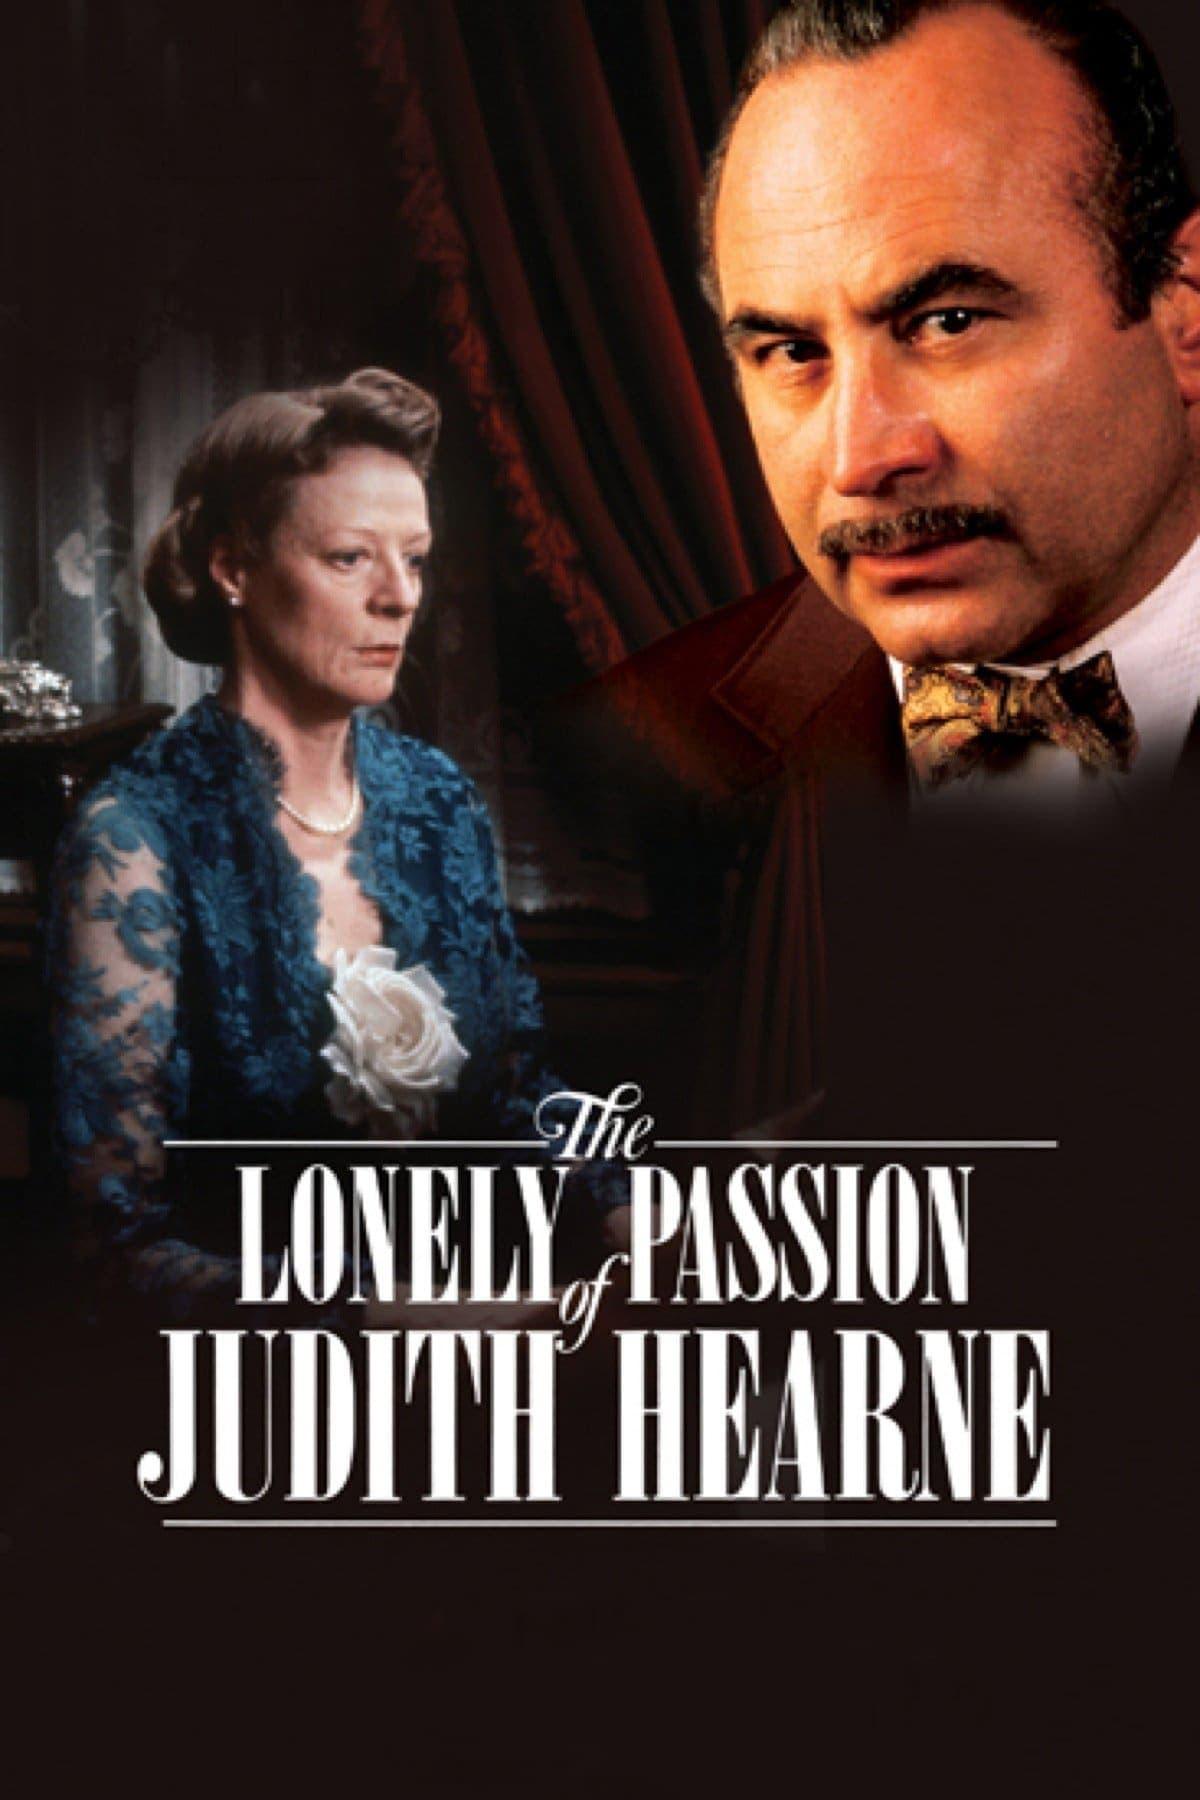 The Lonely Passion of Judith Hearne poster